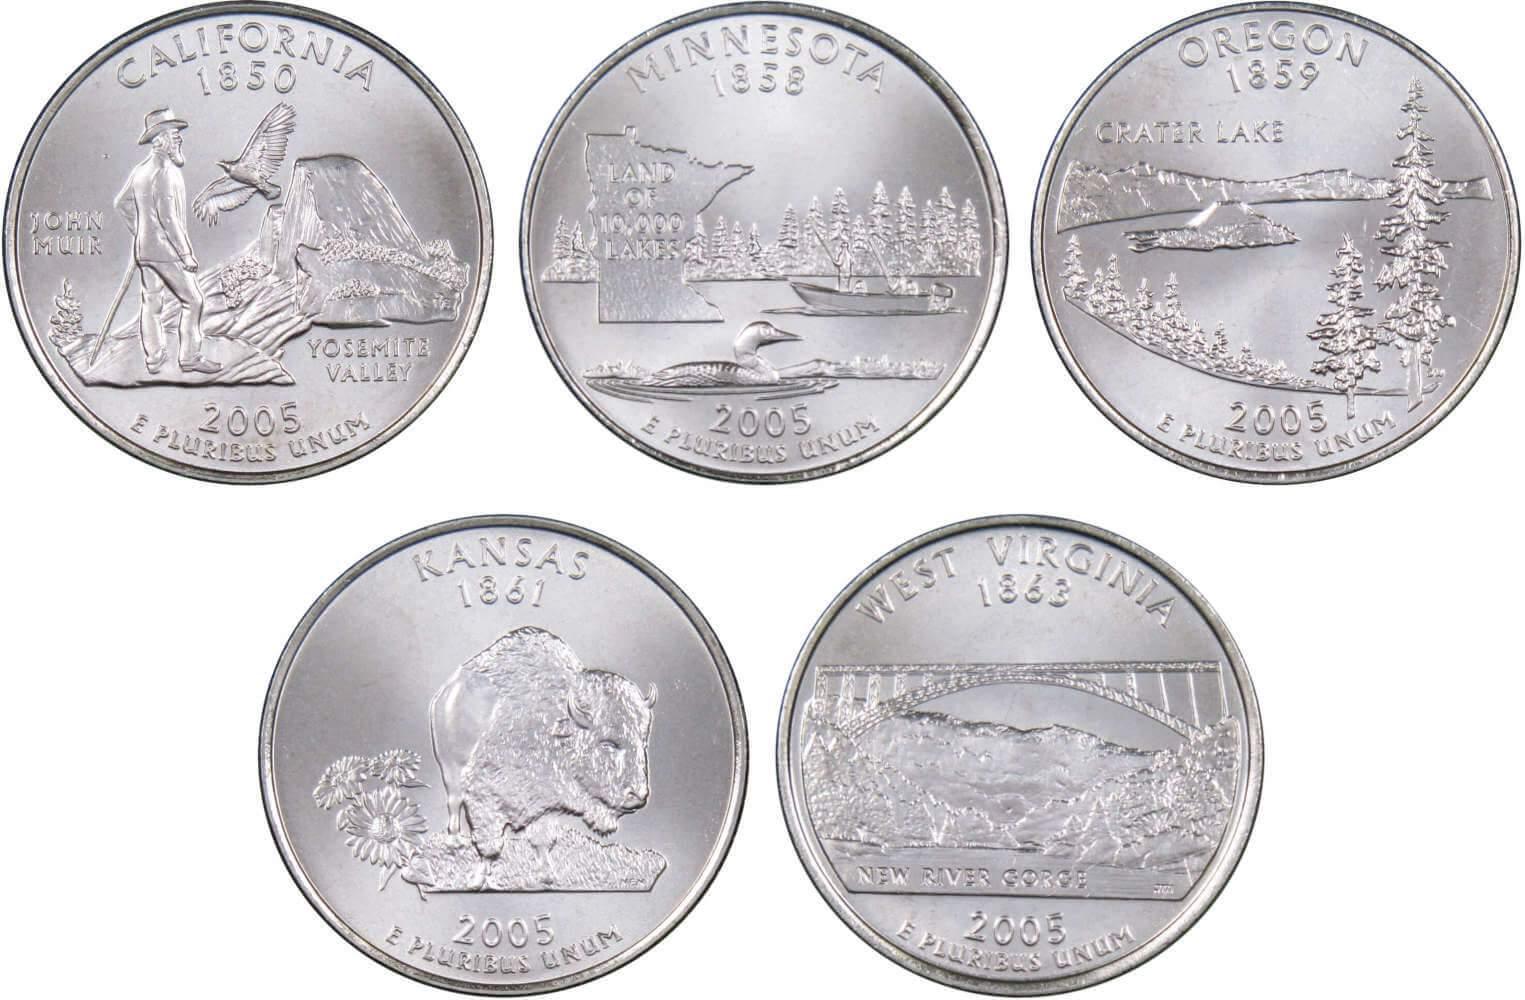 2005 D State Quarter 5 Coin Set BU Uncirculated Mint State 25c Collectible